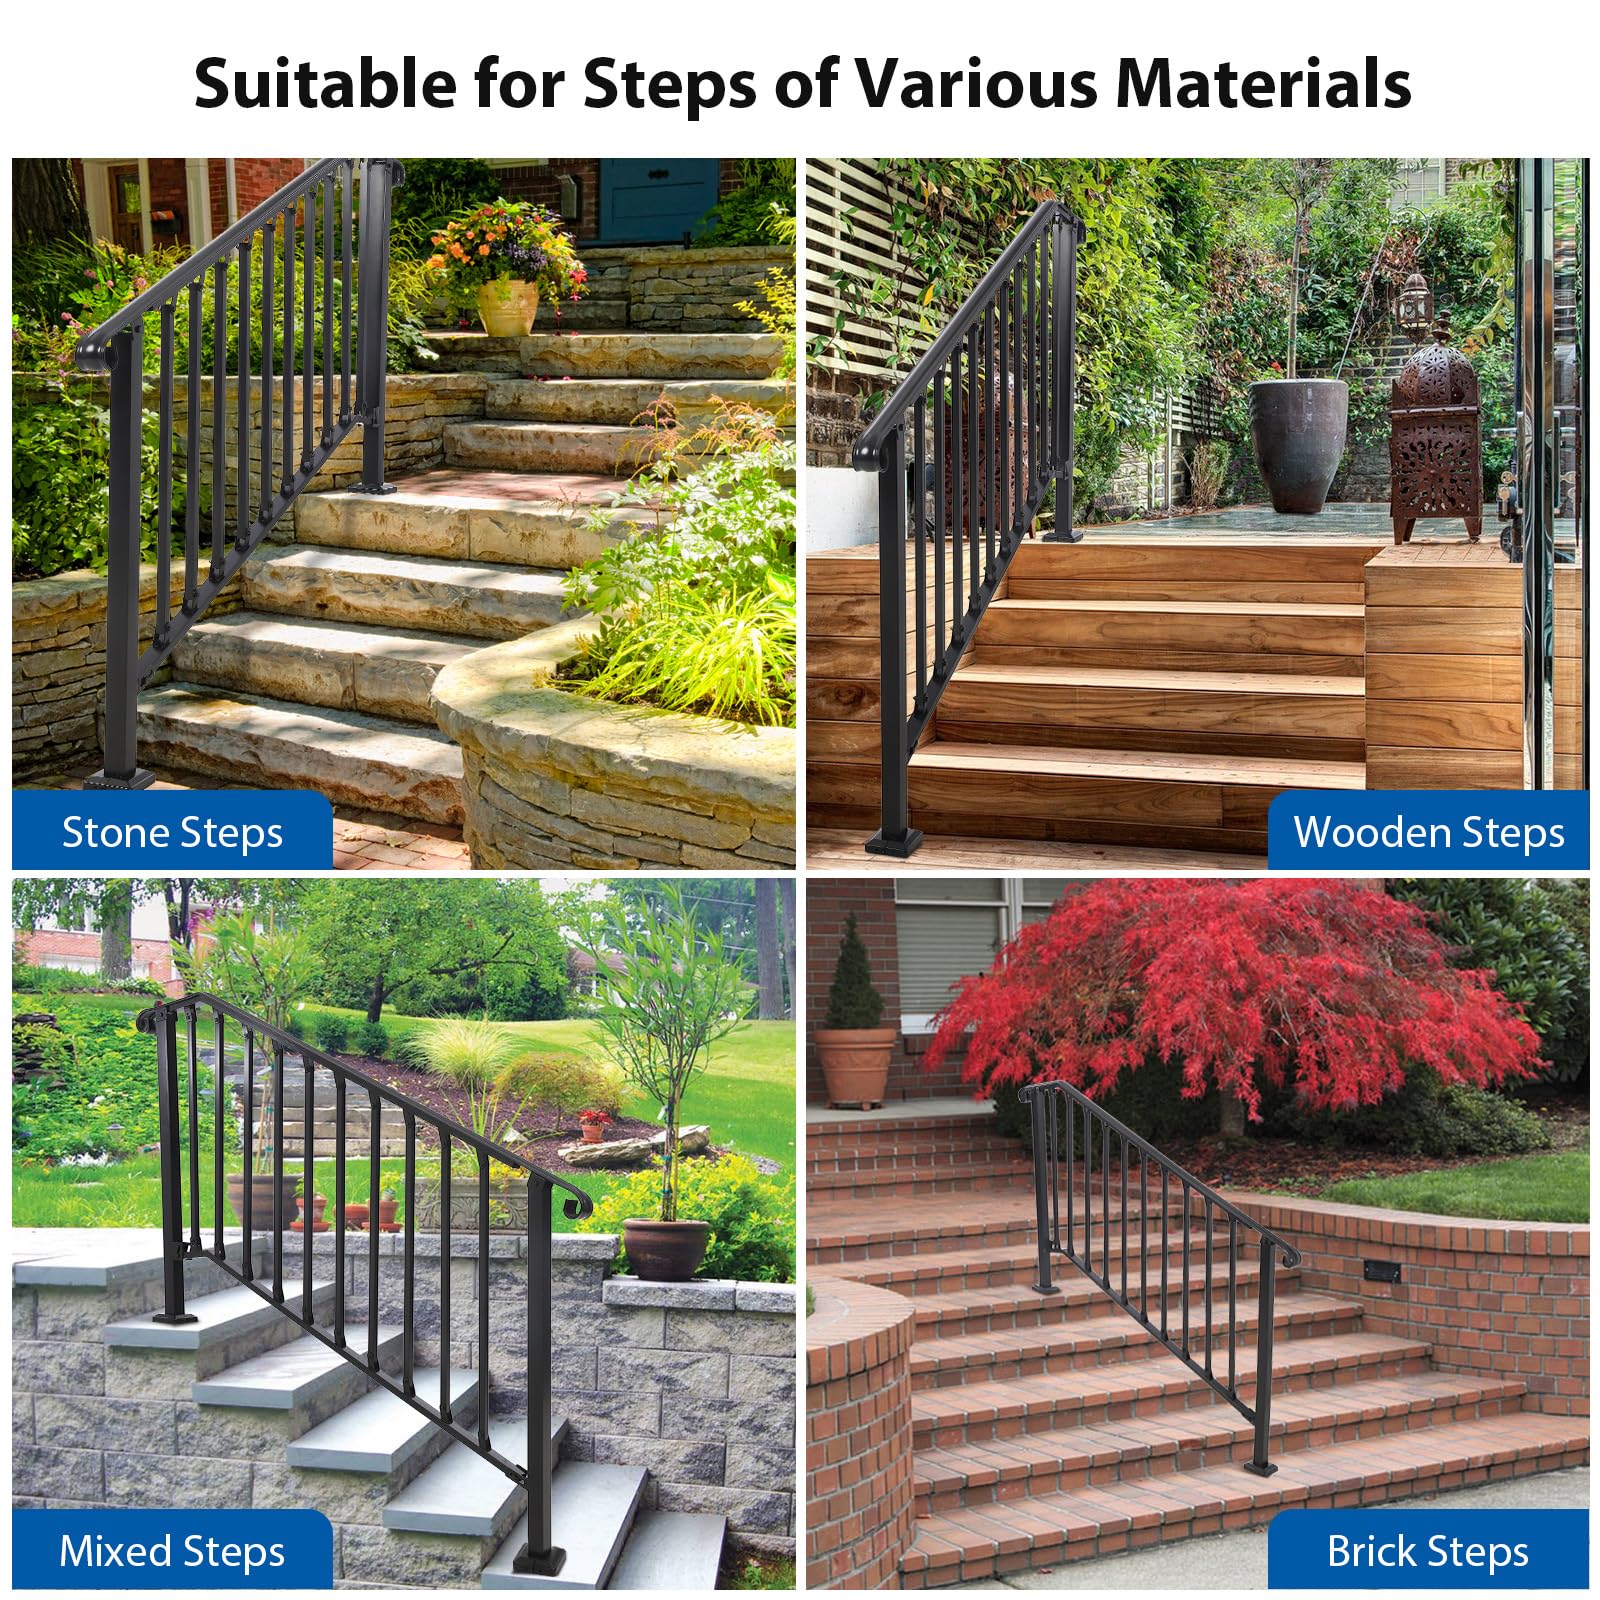 Adjustable Handrail 4-5 Steps, Kit Included, for Outdoor Stairs - GARVEE